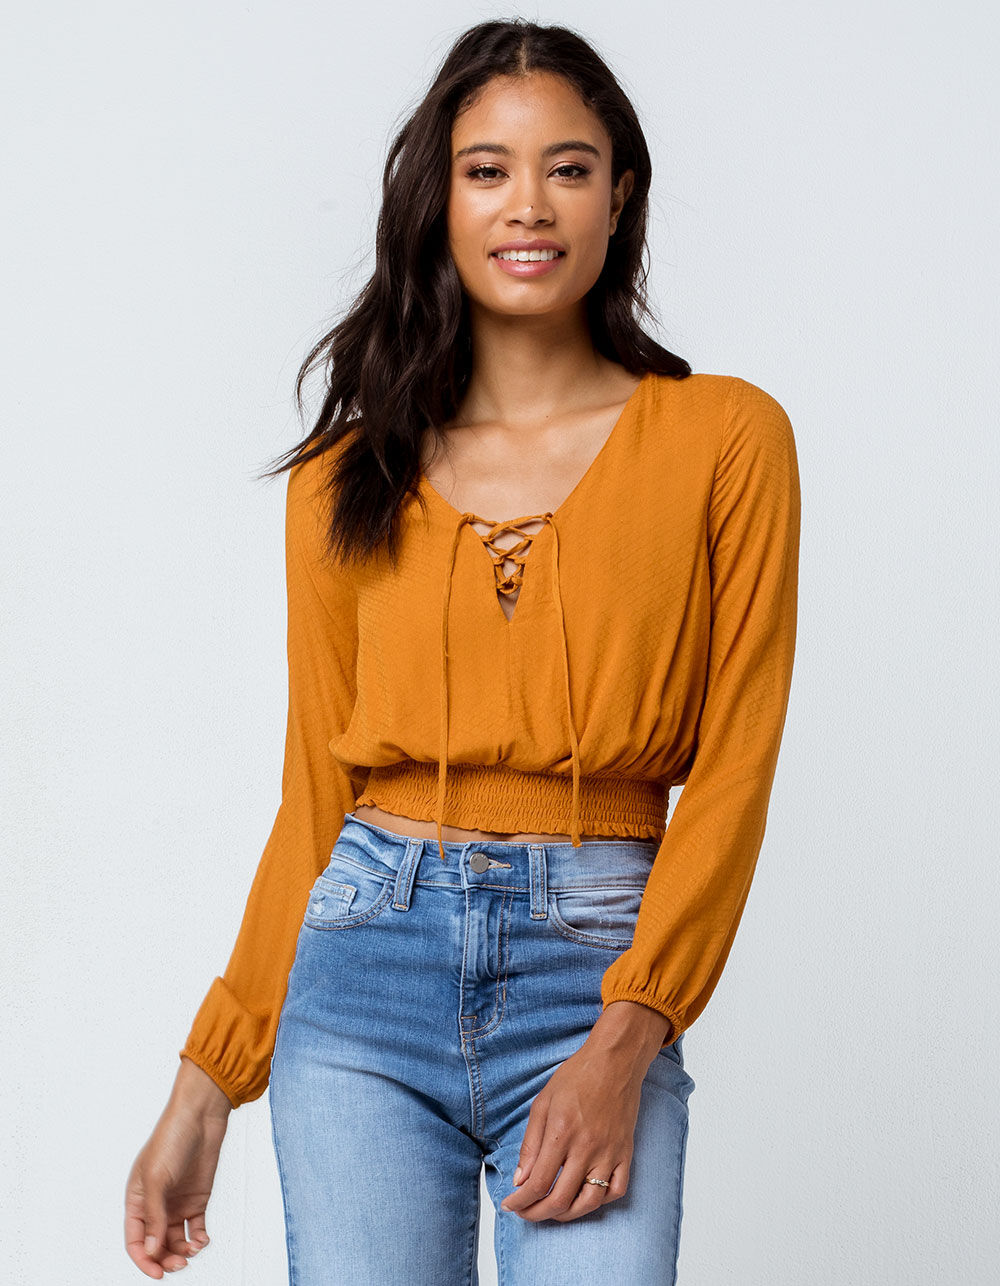 SKY AND SPARROW Lace Up Smock Mustard Womens Top - MUSTARD | Tillys